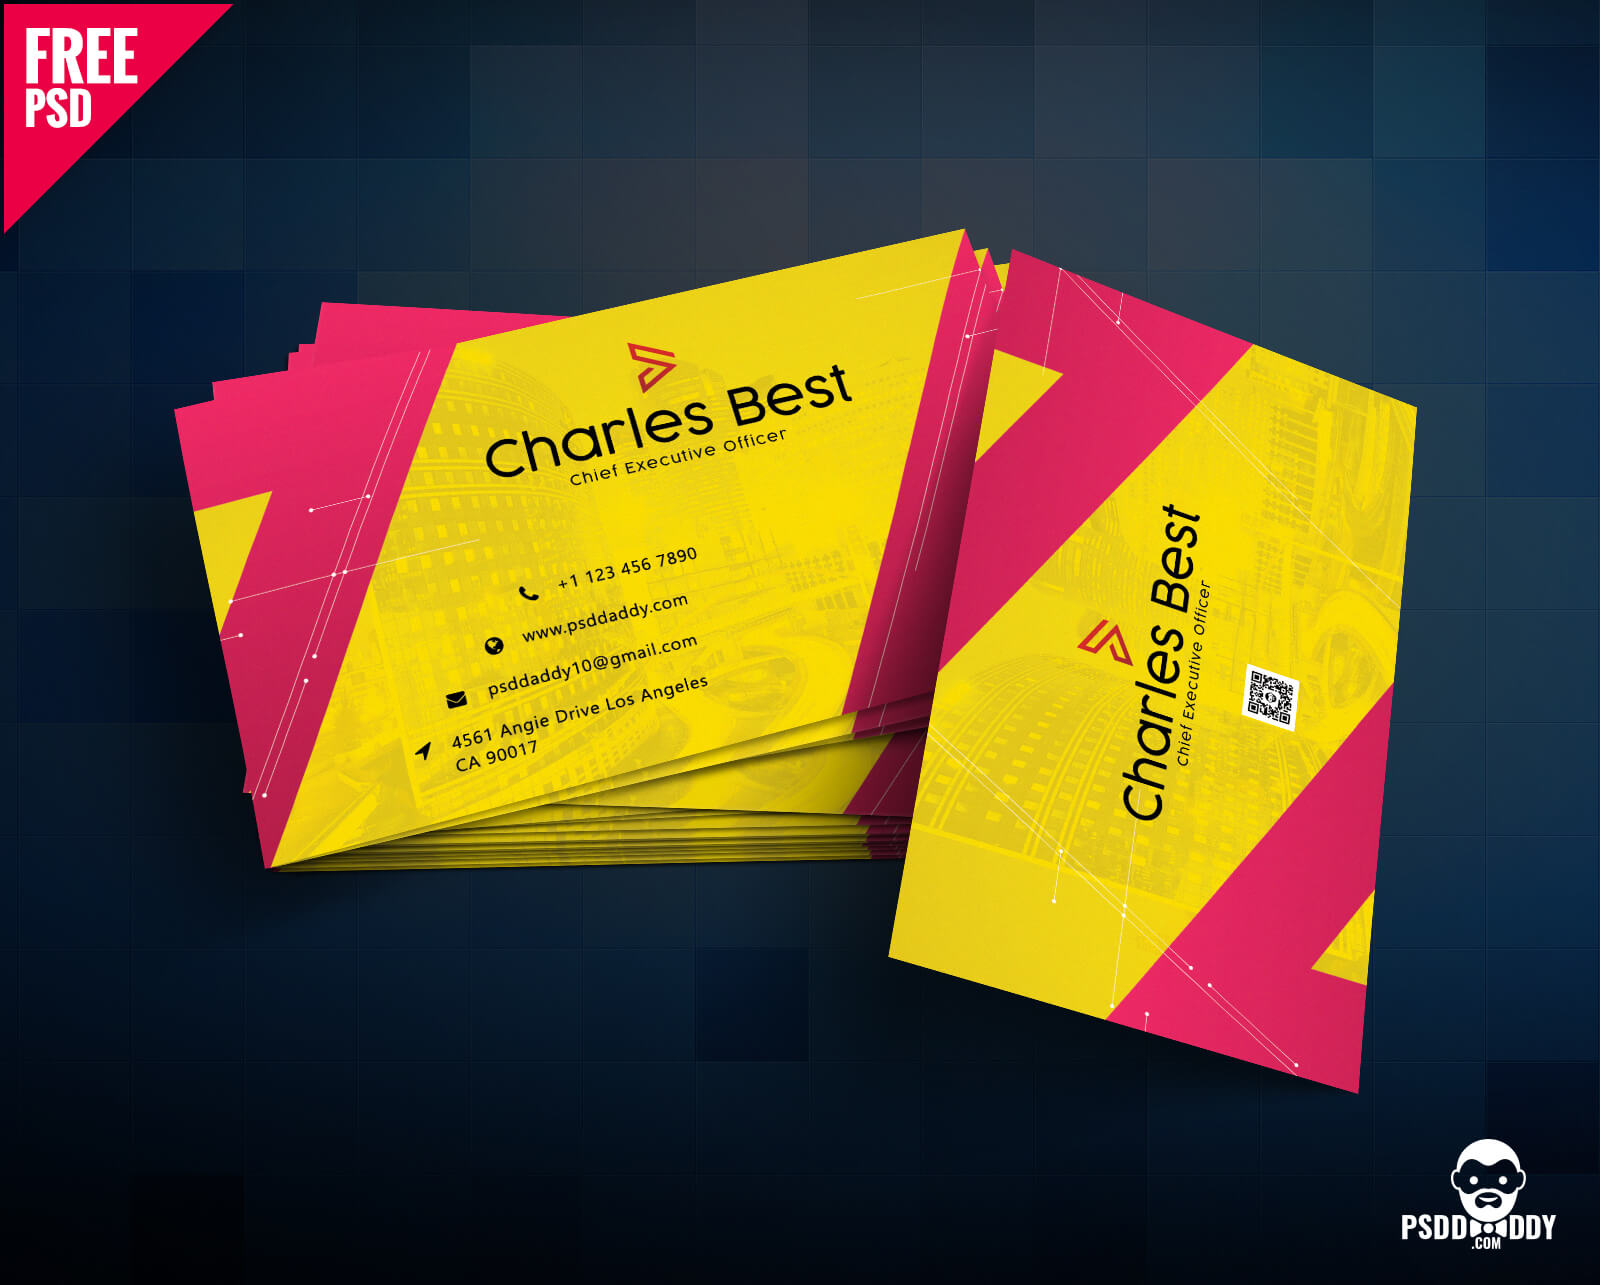 Download] Creative Business Card Free Psd | Psddaddy Inside Iphone Business Card Template